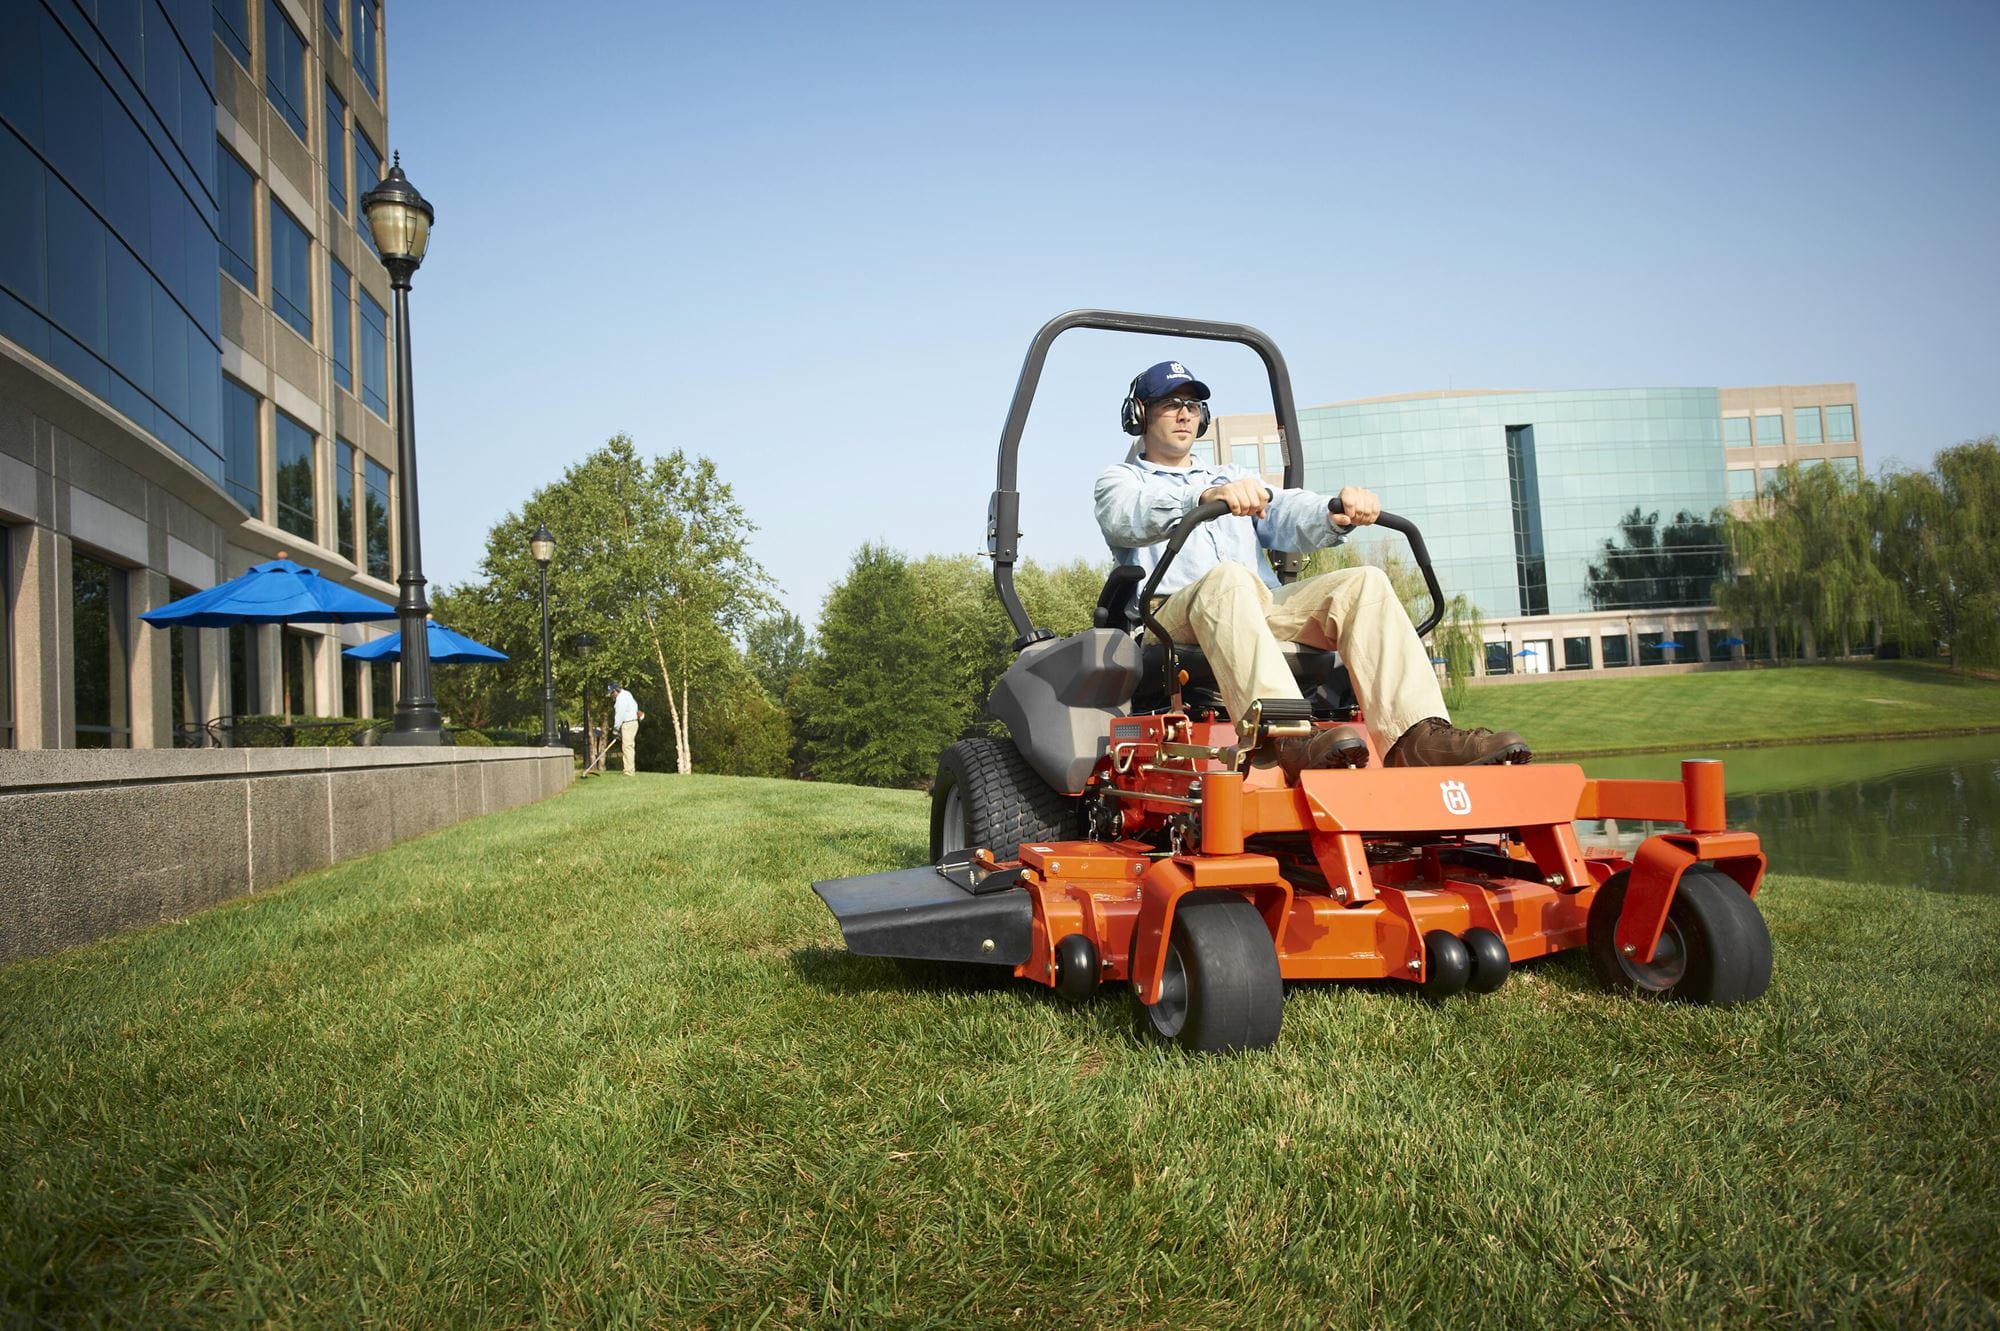 Husqvarna Zero-Turn Mowers are durable, with a large steel tube chassis and powerful engines